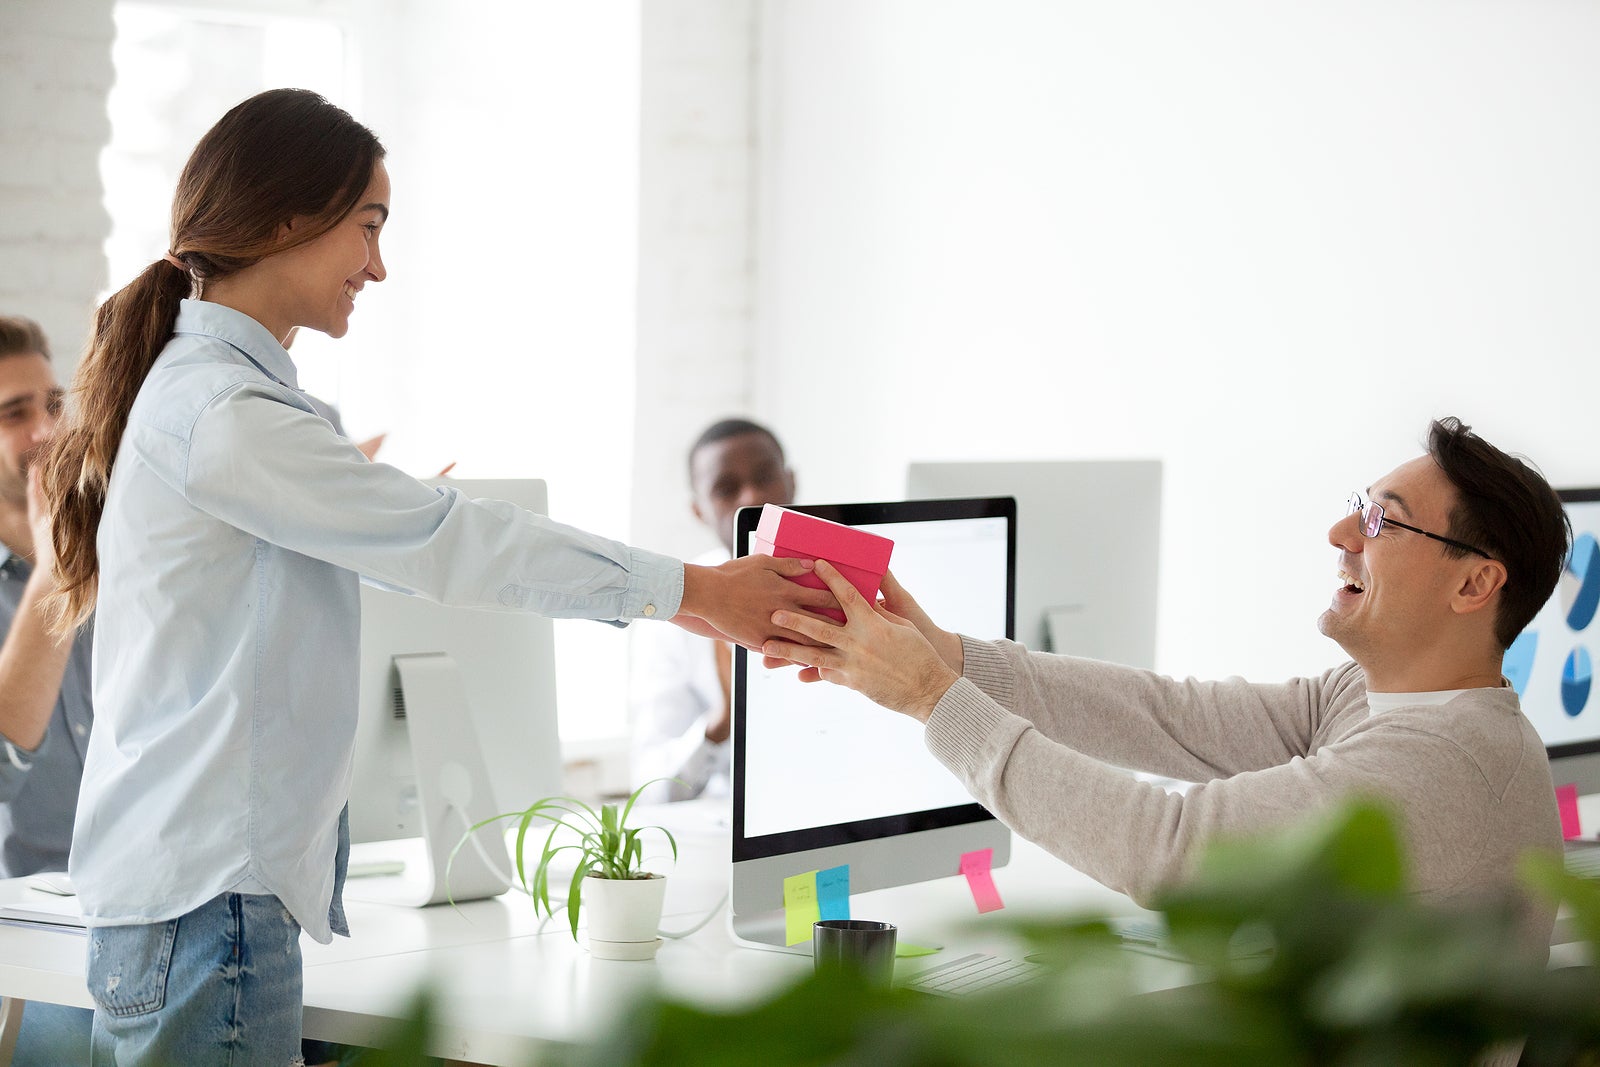 4 Great Ways to Reward Your Employees